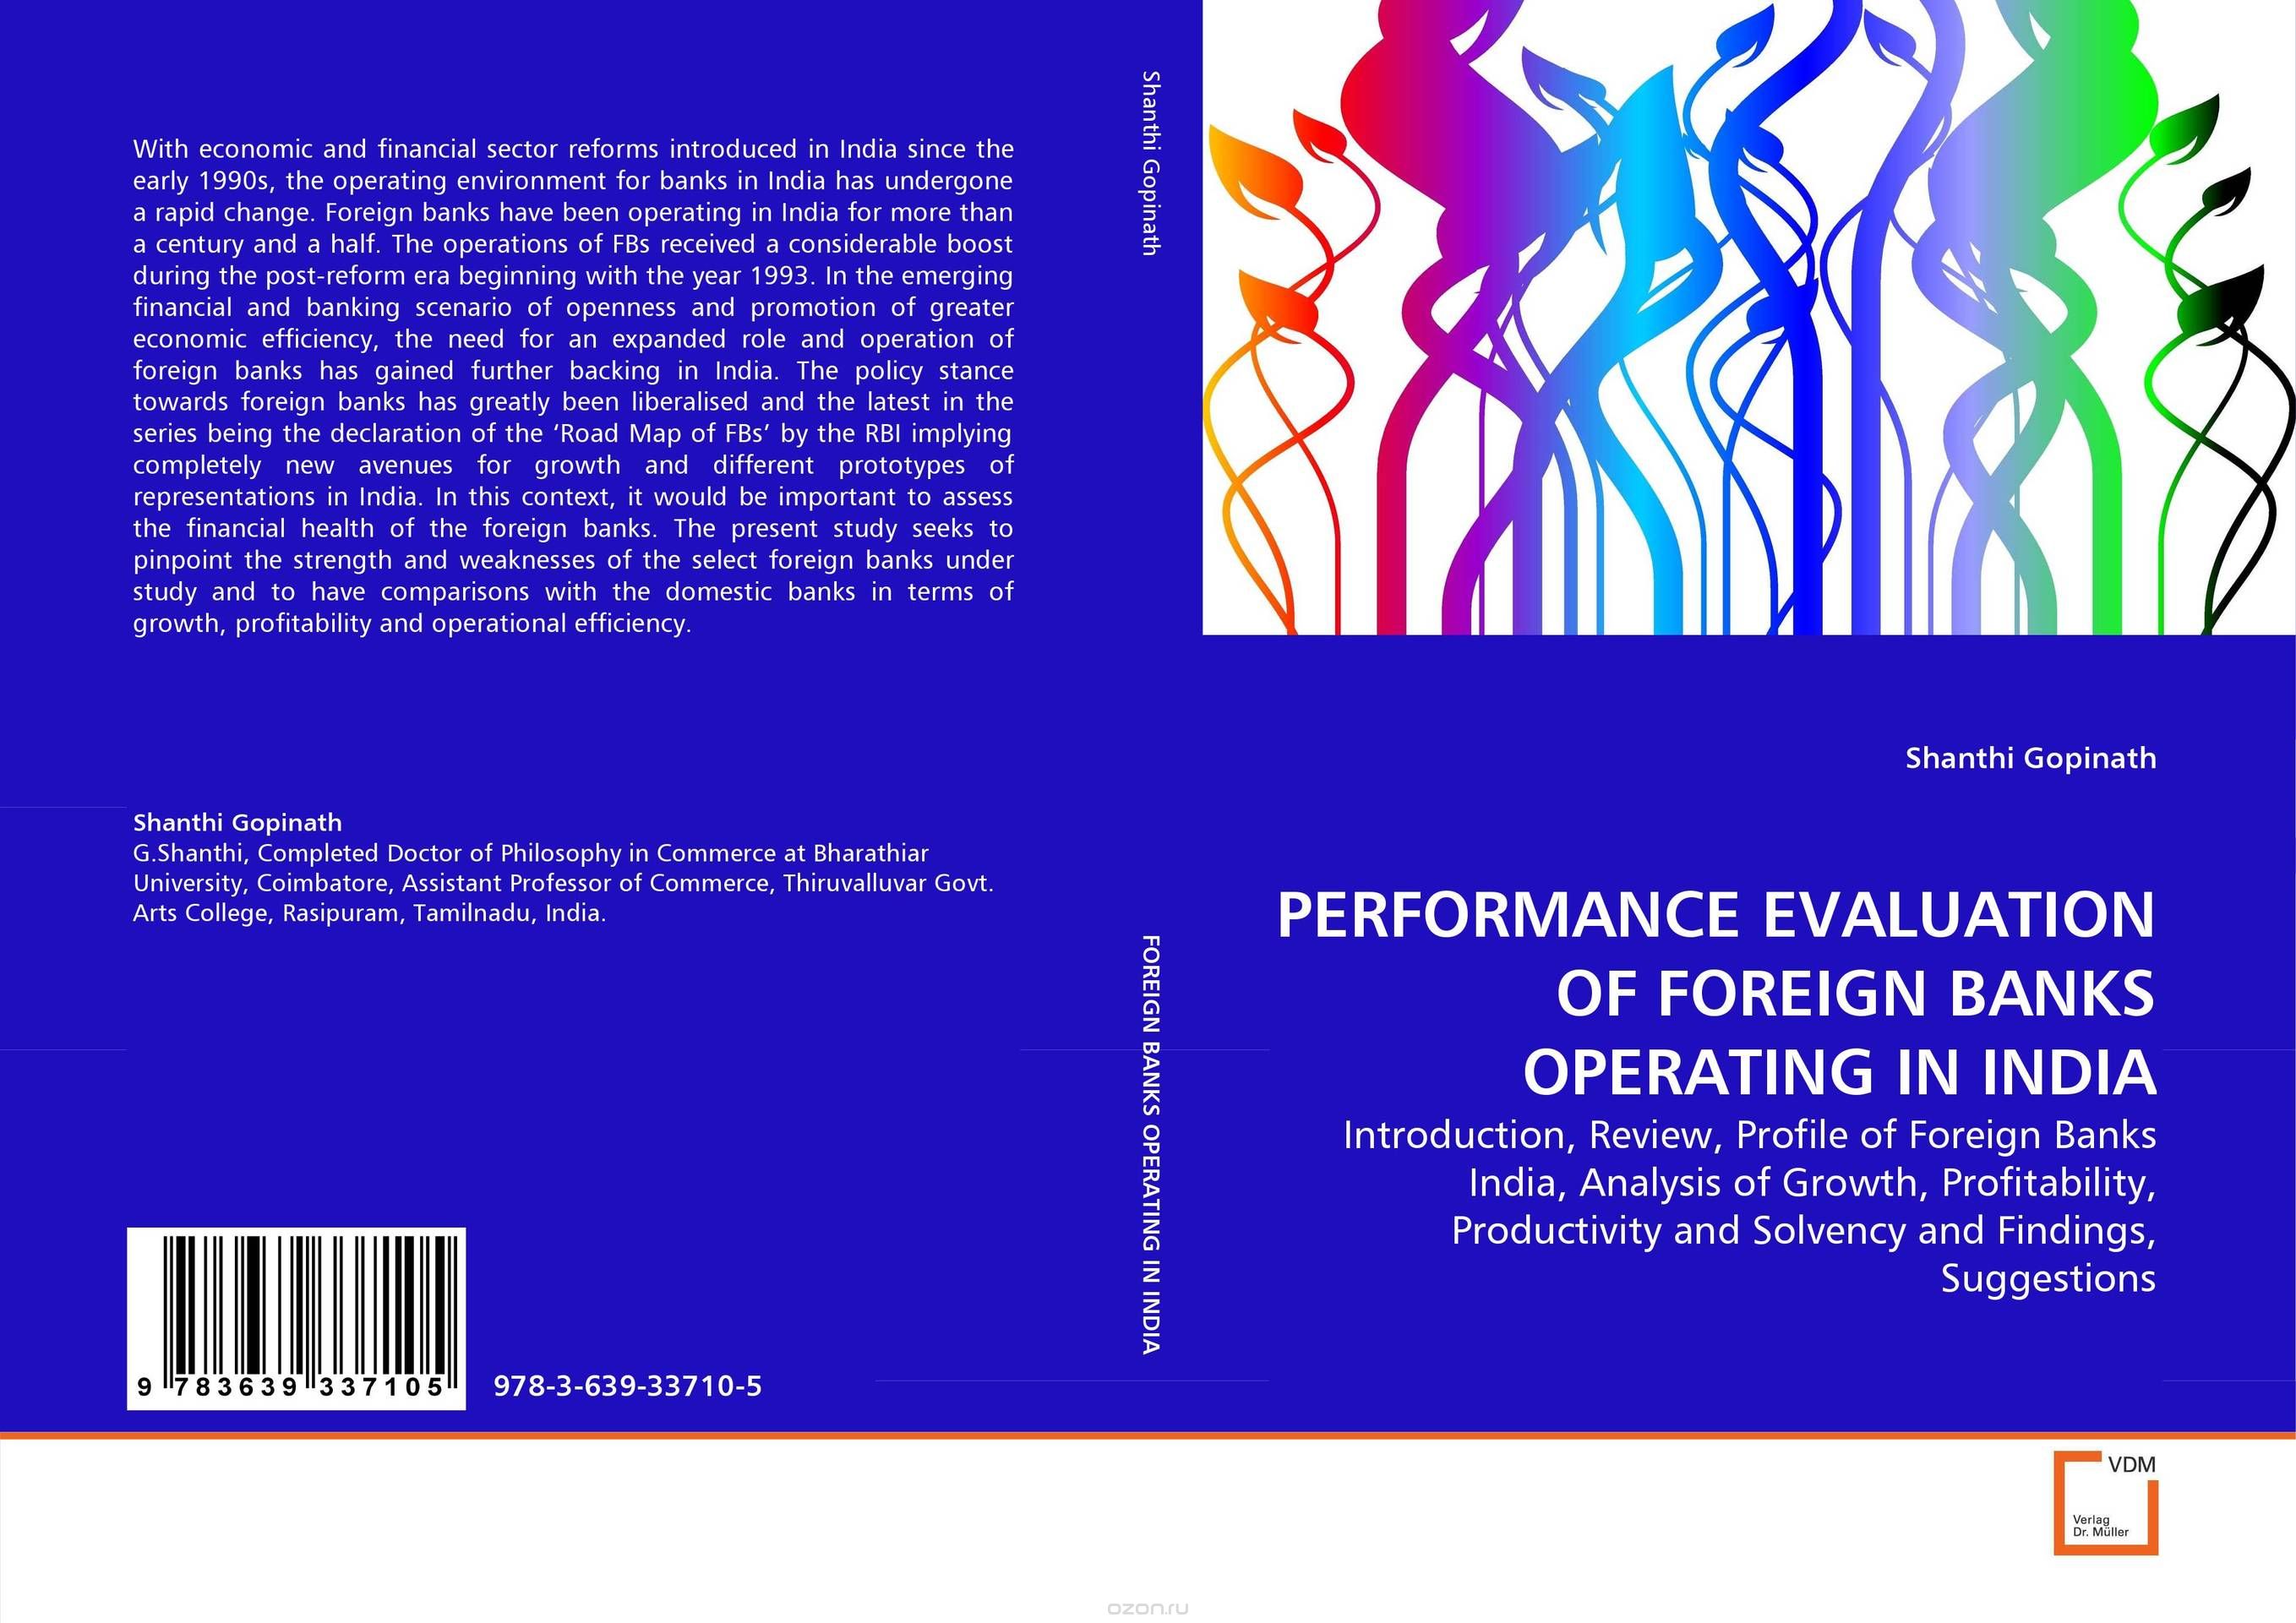 Скачать книгу "PERFORMANCE EVALUATION OF FOREIGN BANKS OPERATING IN INDIA"